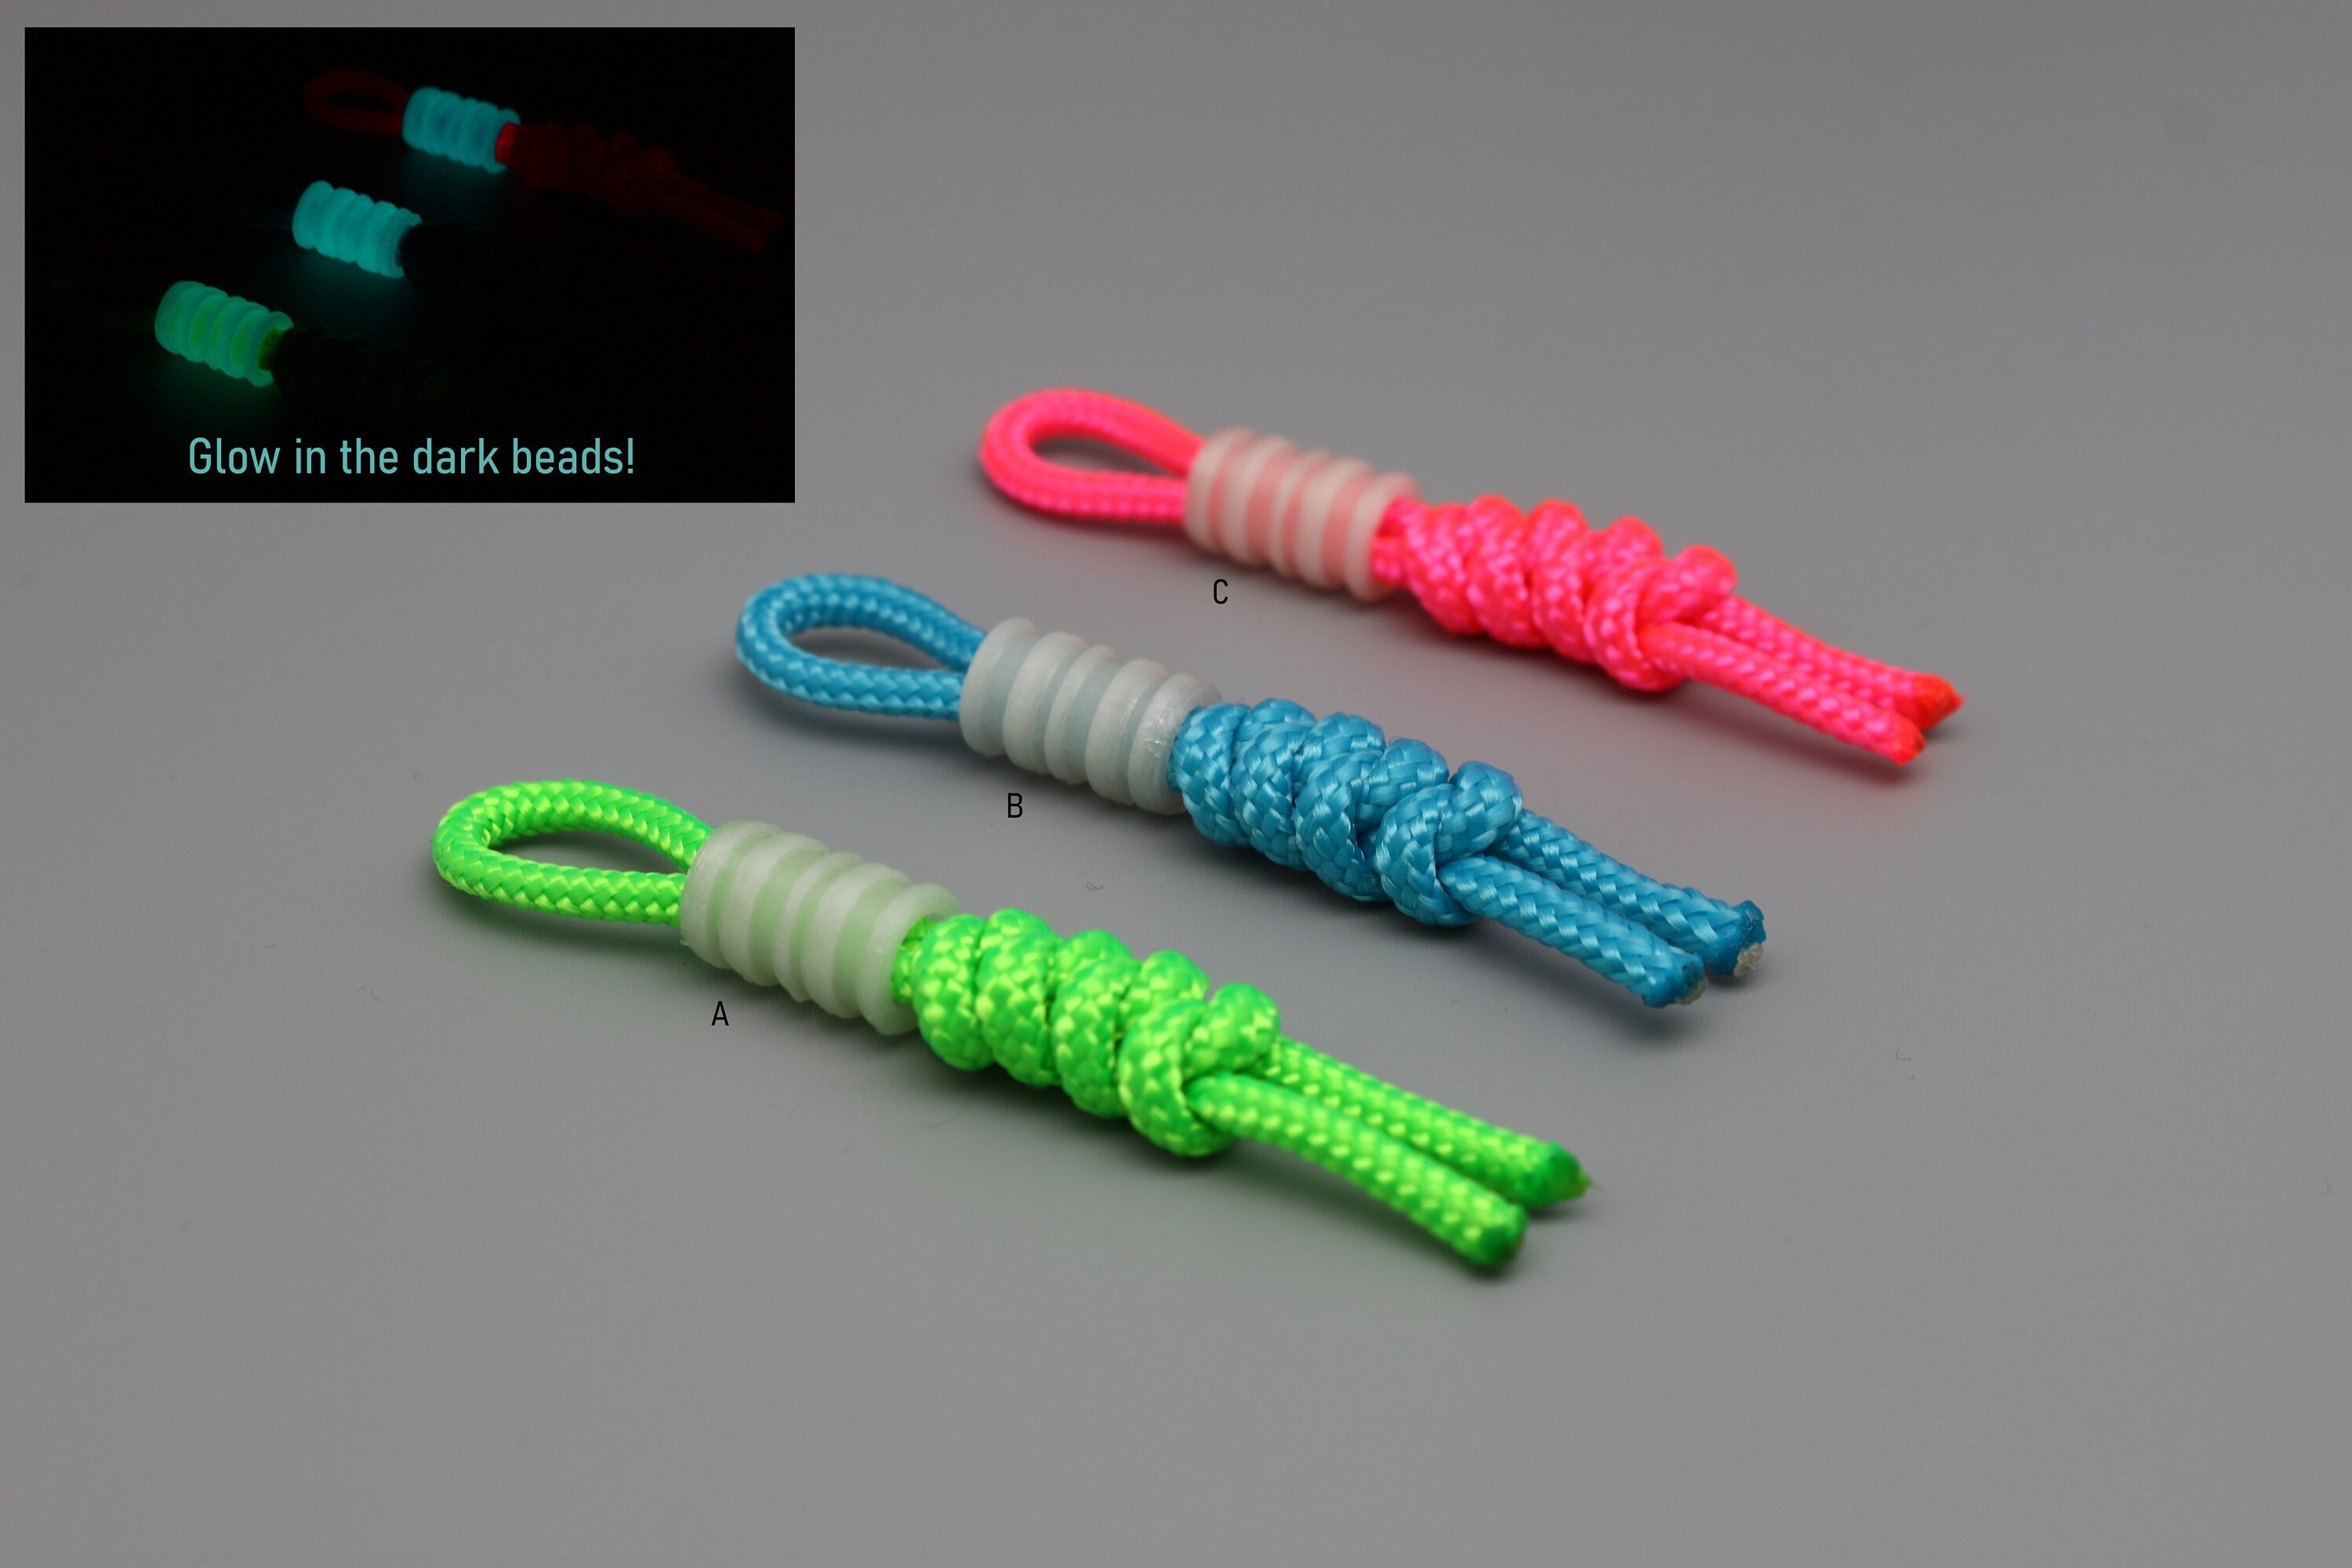 ACCESSORY Paracord Lanyard and 3D Printed Glow in the Dark Bead 